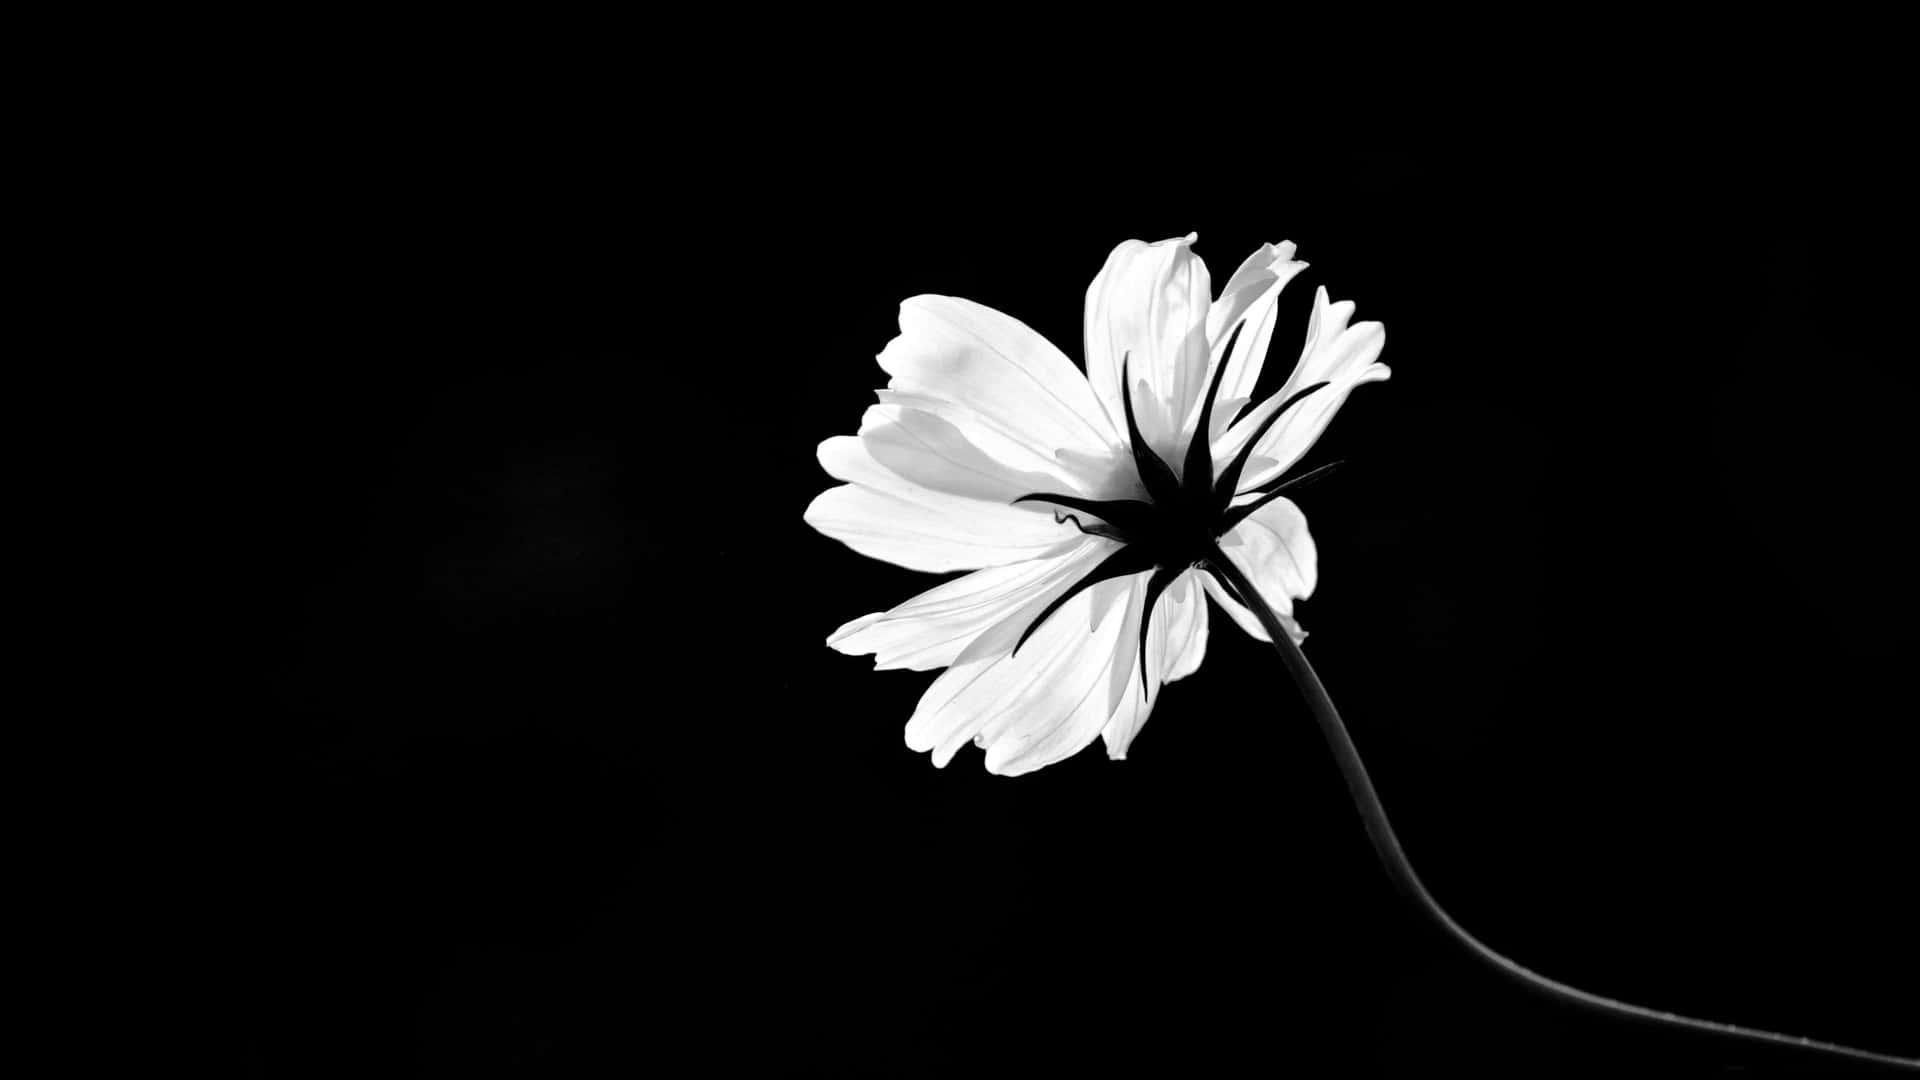 "Experience the beauty of a unique combination of dark and light in the petals of these Flowers With Black." Wallpaper